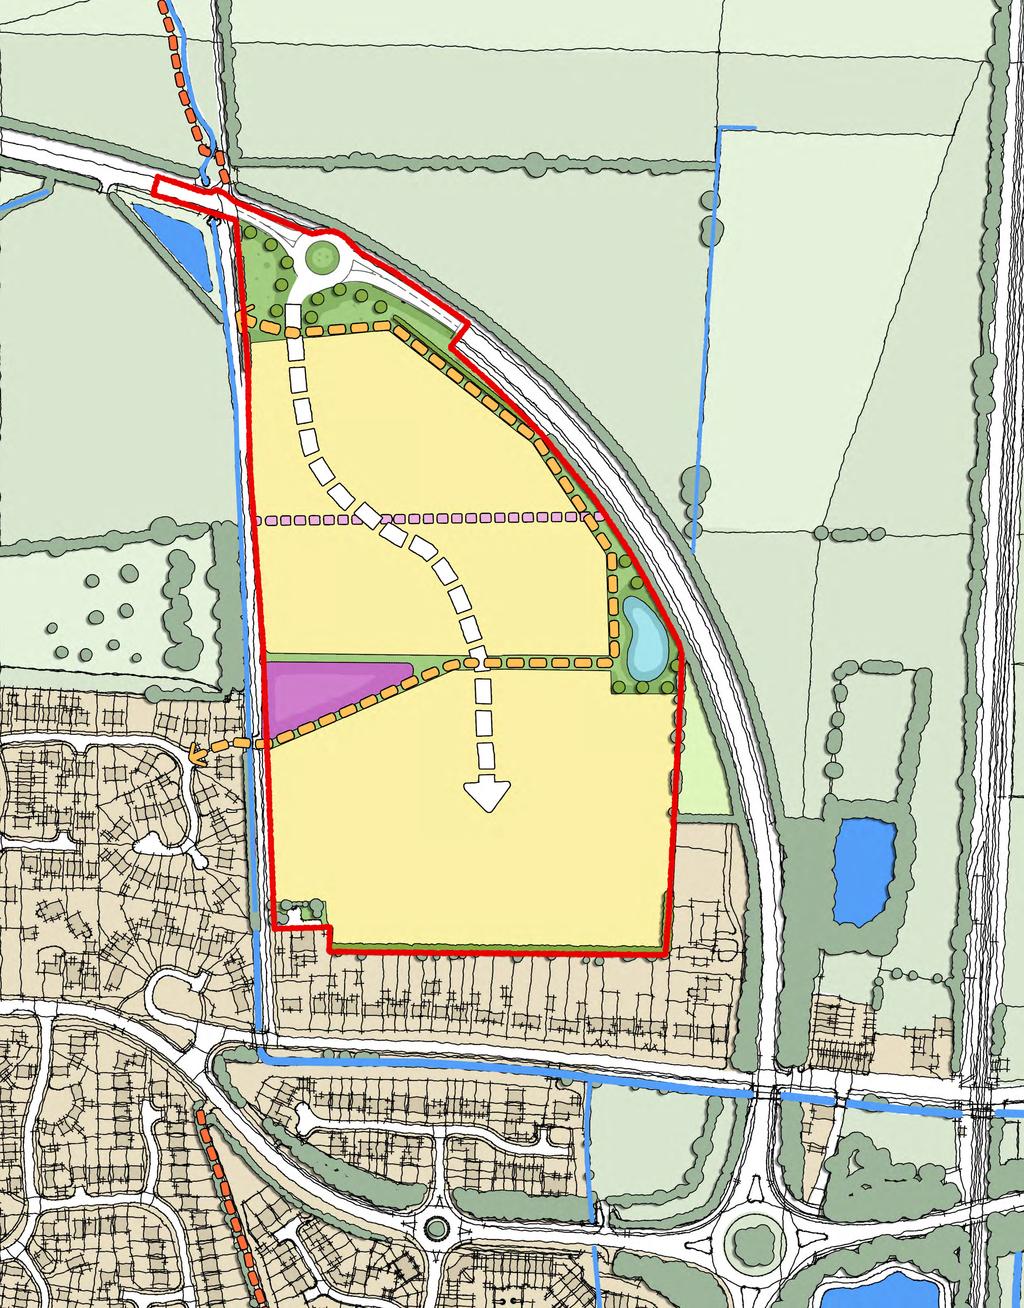 The Proposal intends to submit an outline planning application for the site to establish the means of access and parameters for development only at this stage.